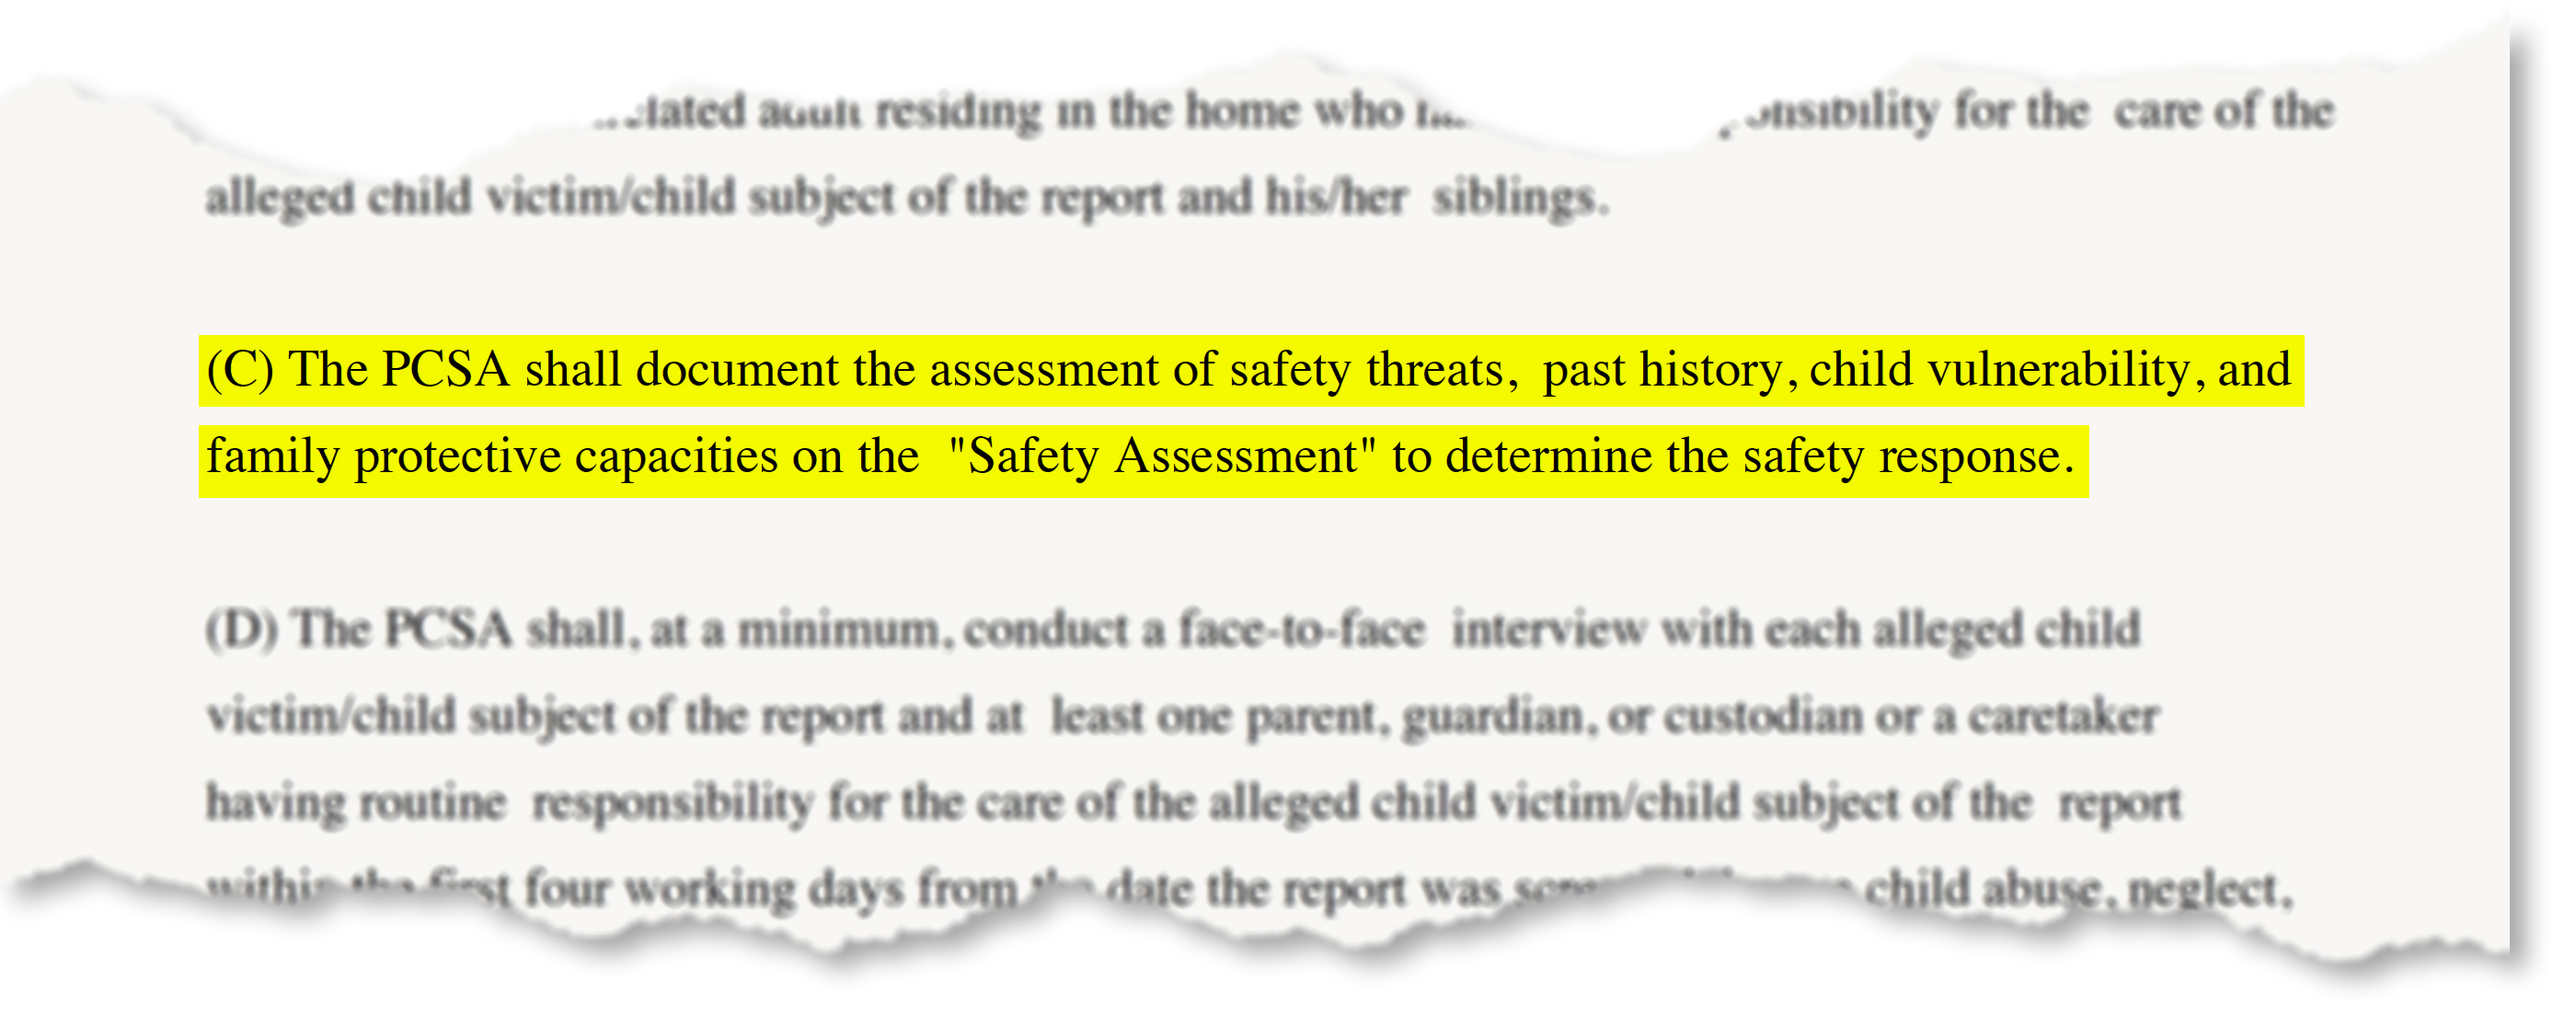 A section of the Ohio Administrative Code section on safety assessments